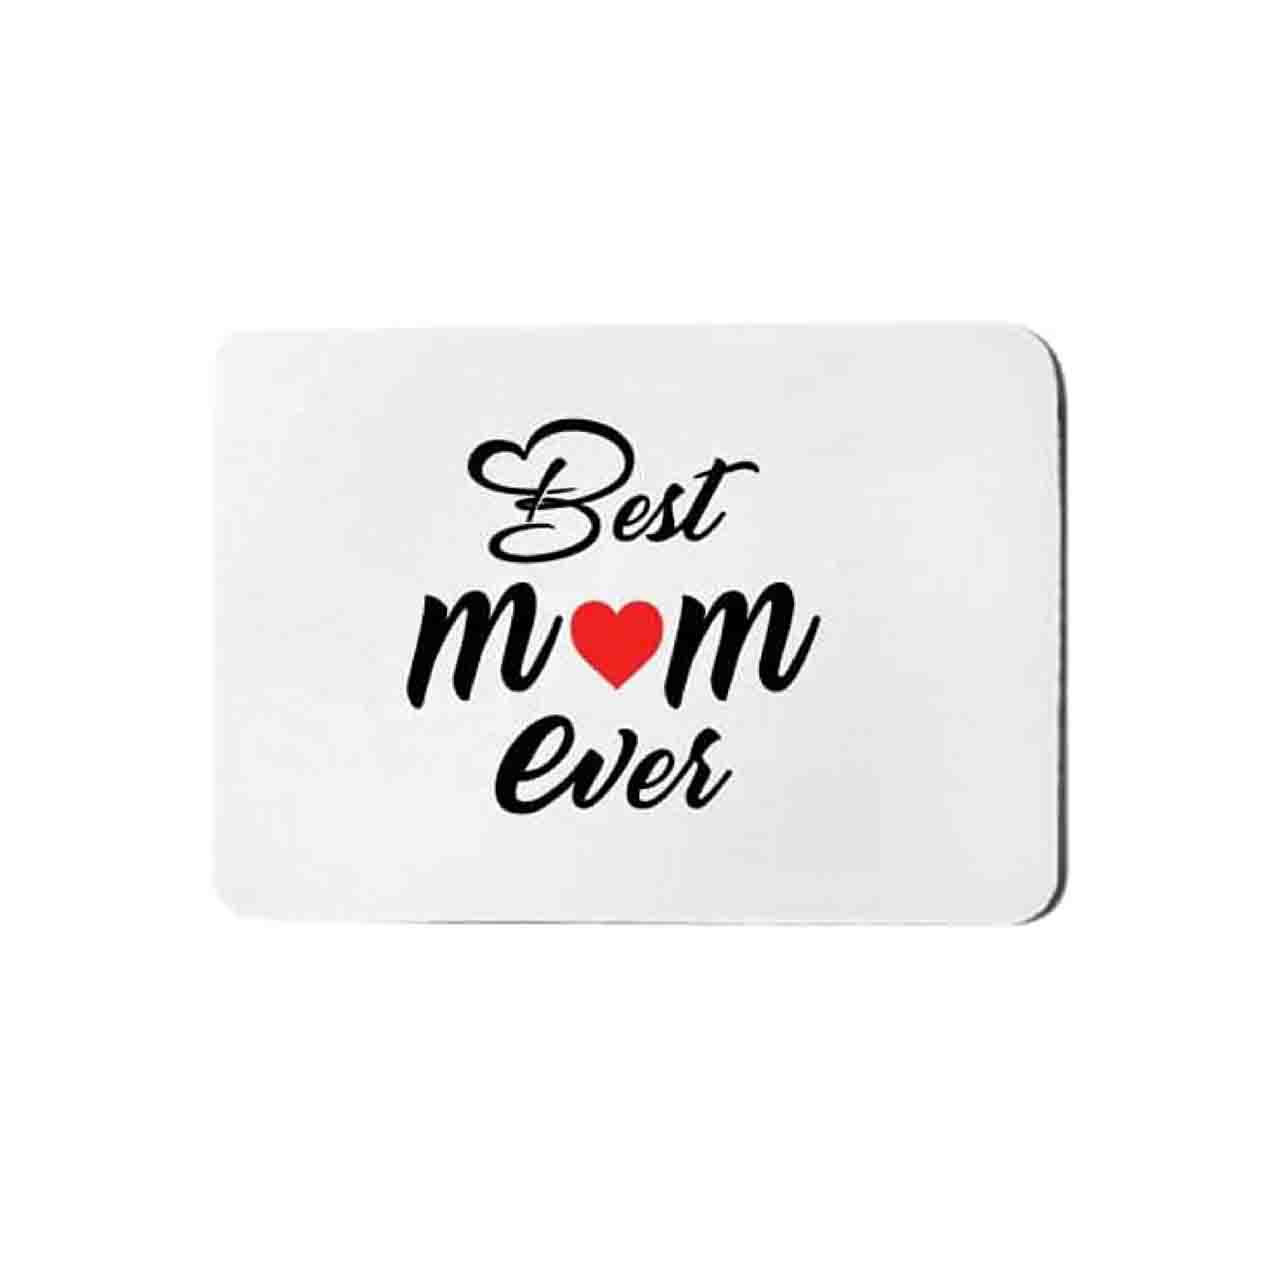 mouse pad, customize mouse pad, mouse pad for mom, mother day gift, mother day mouse pad gift